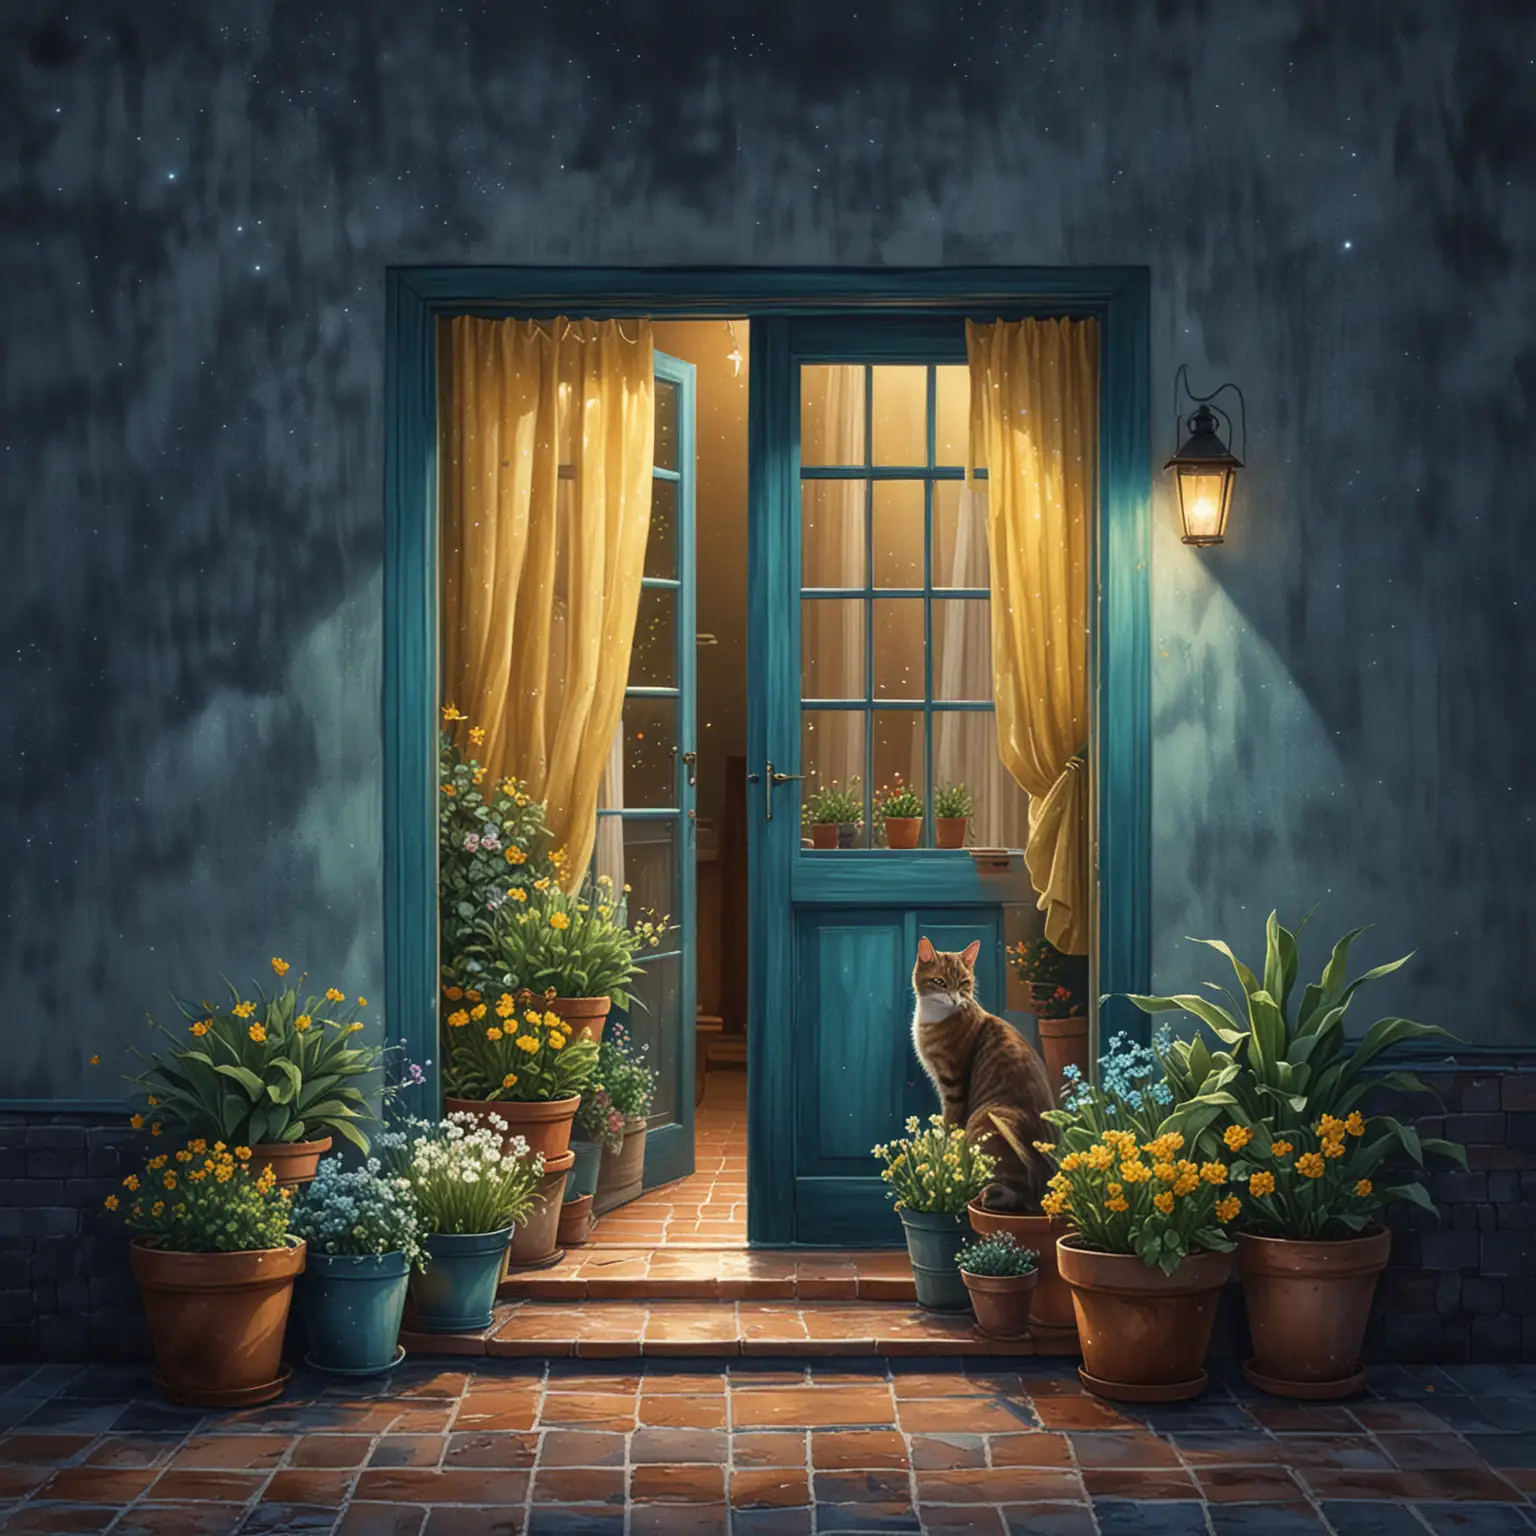 Nighttime Cat Sitting by Open Door with Lantern and Potted Plants